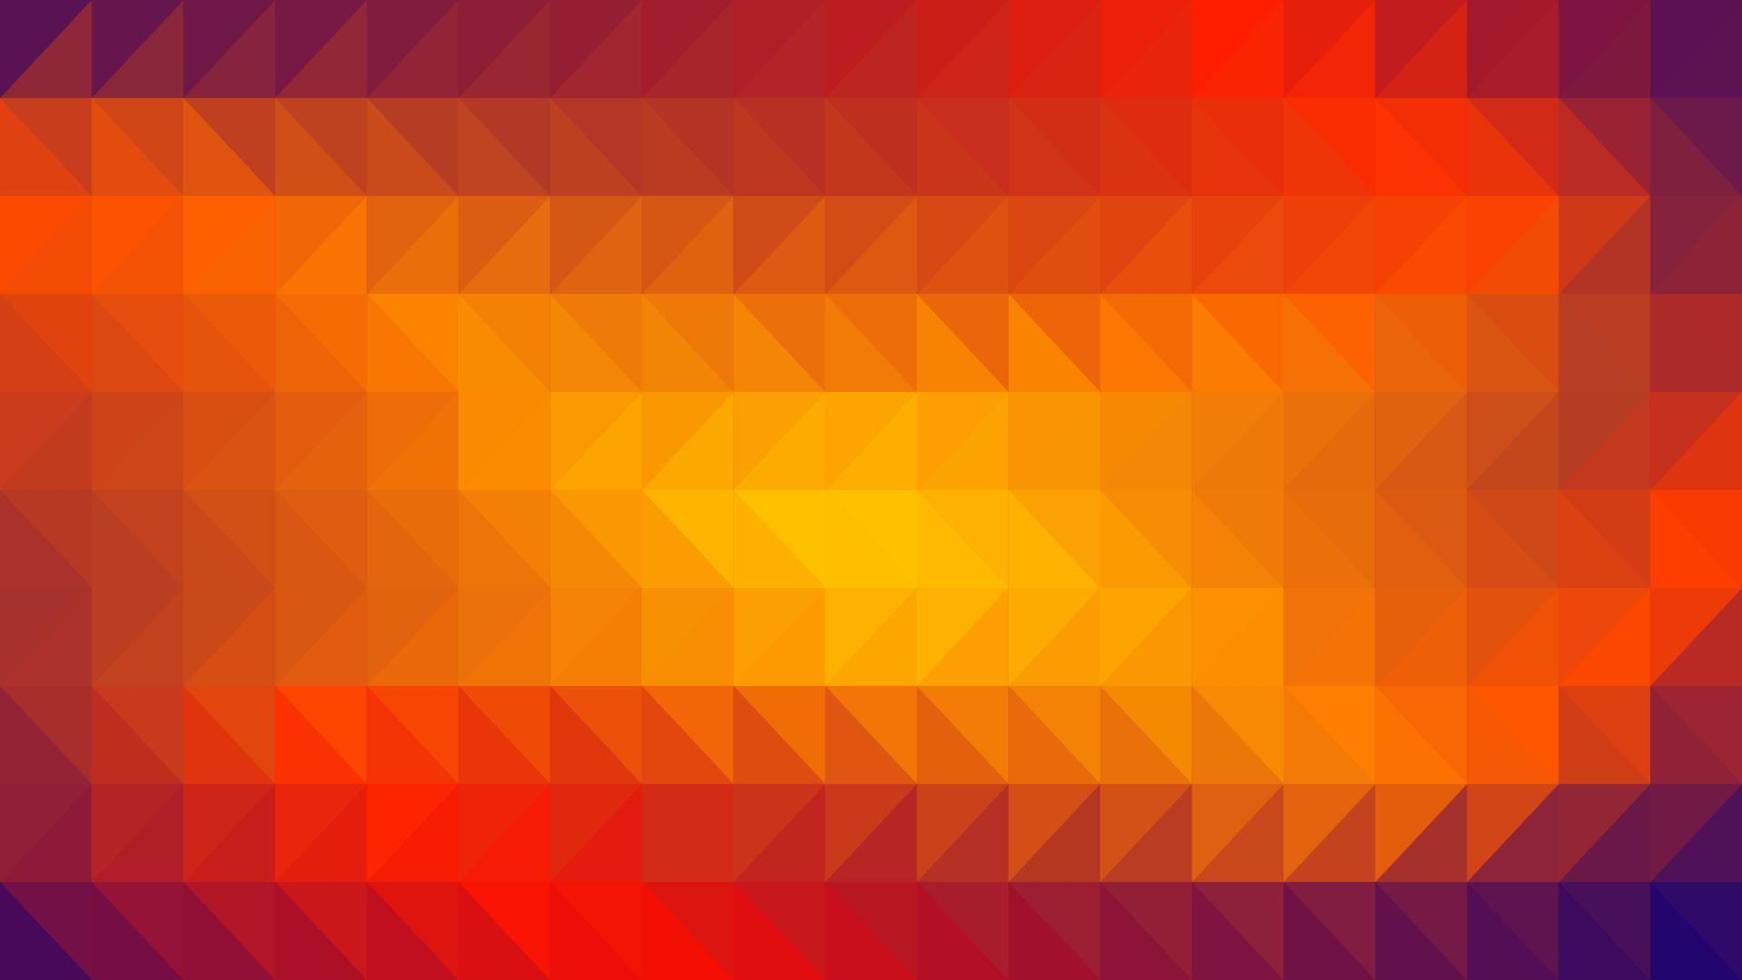 Abstract colorful geometric vector background